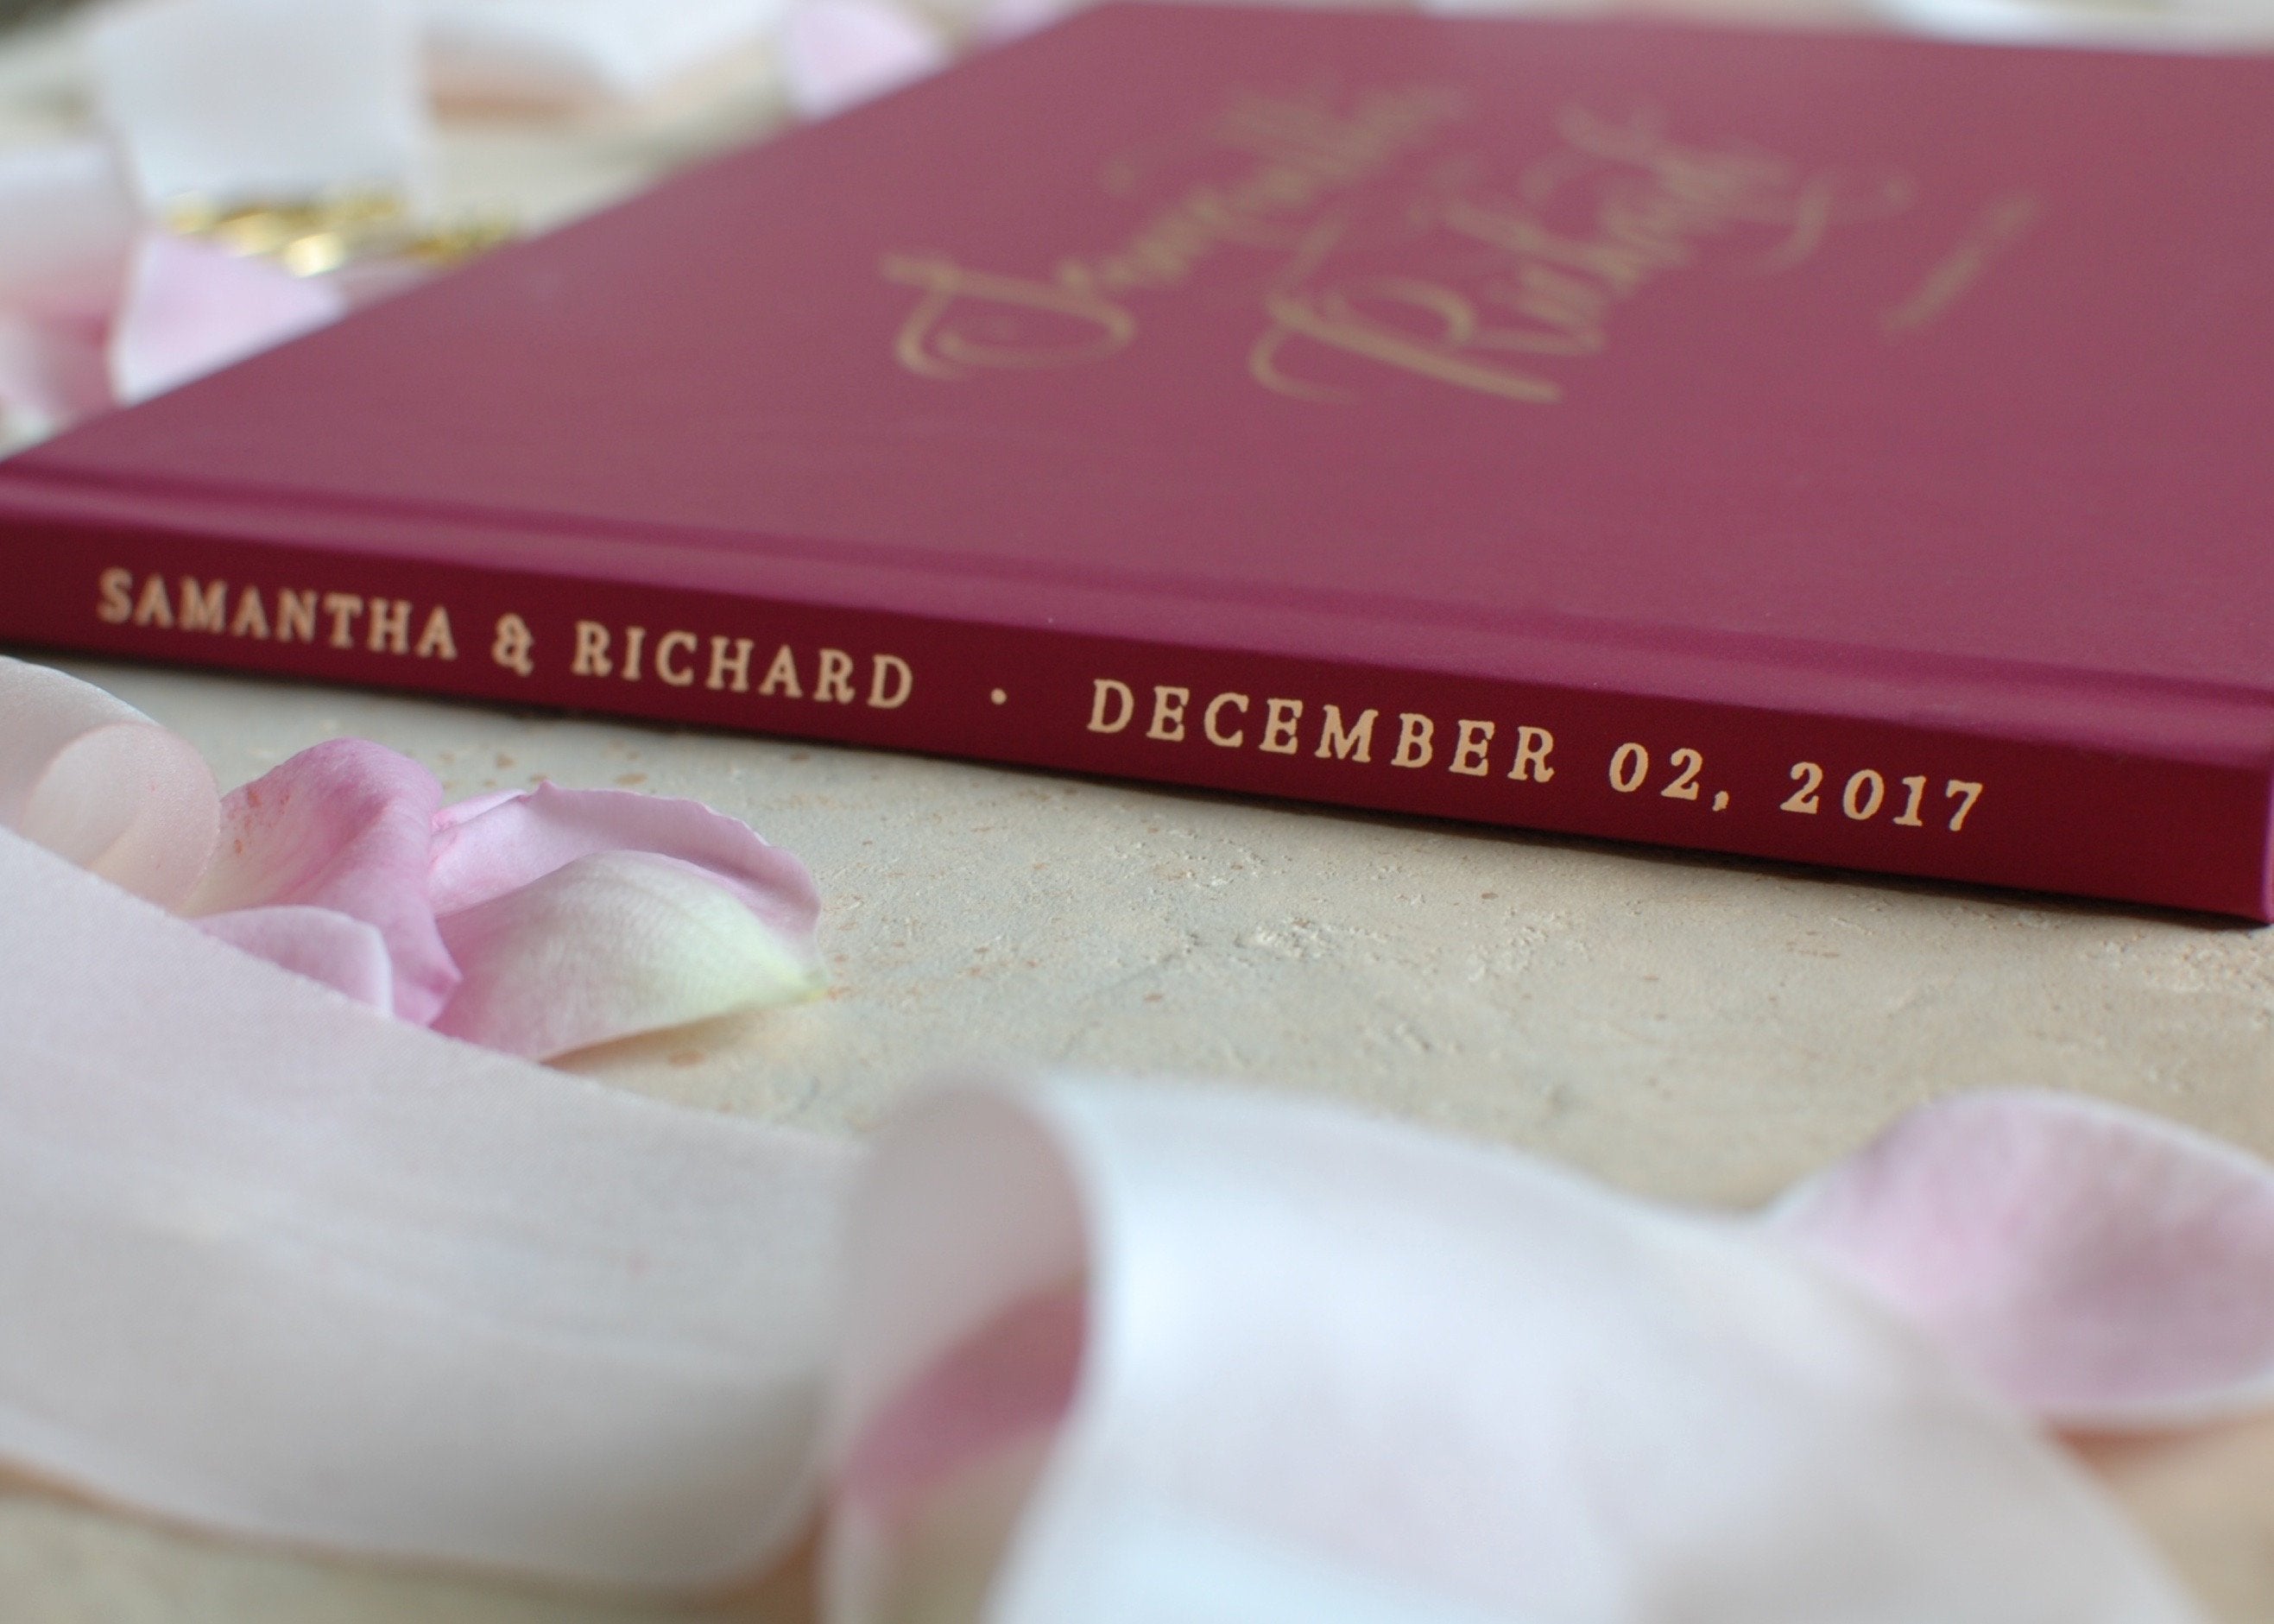 Personalized Guest Book